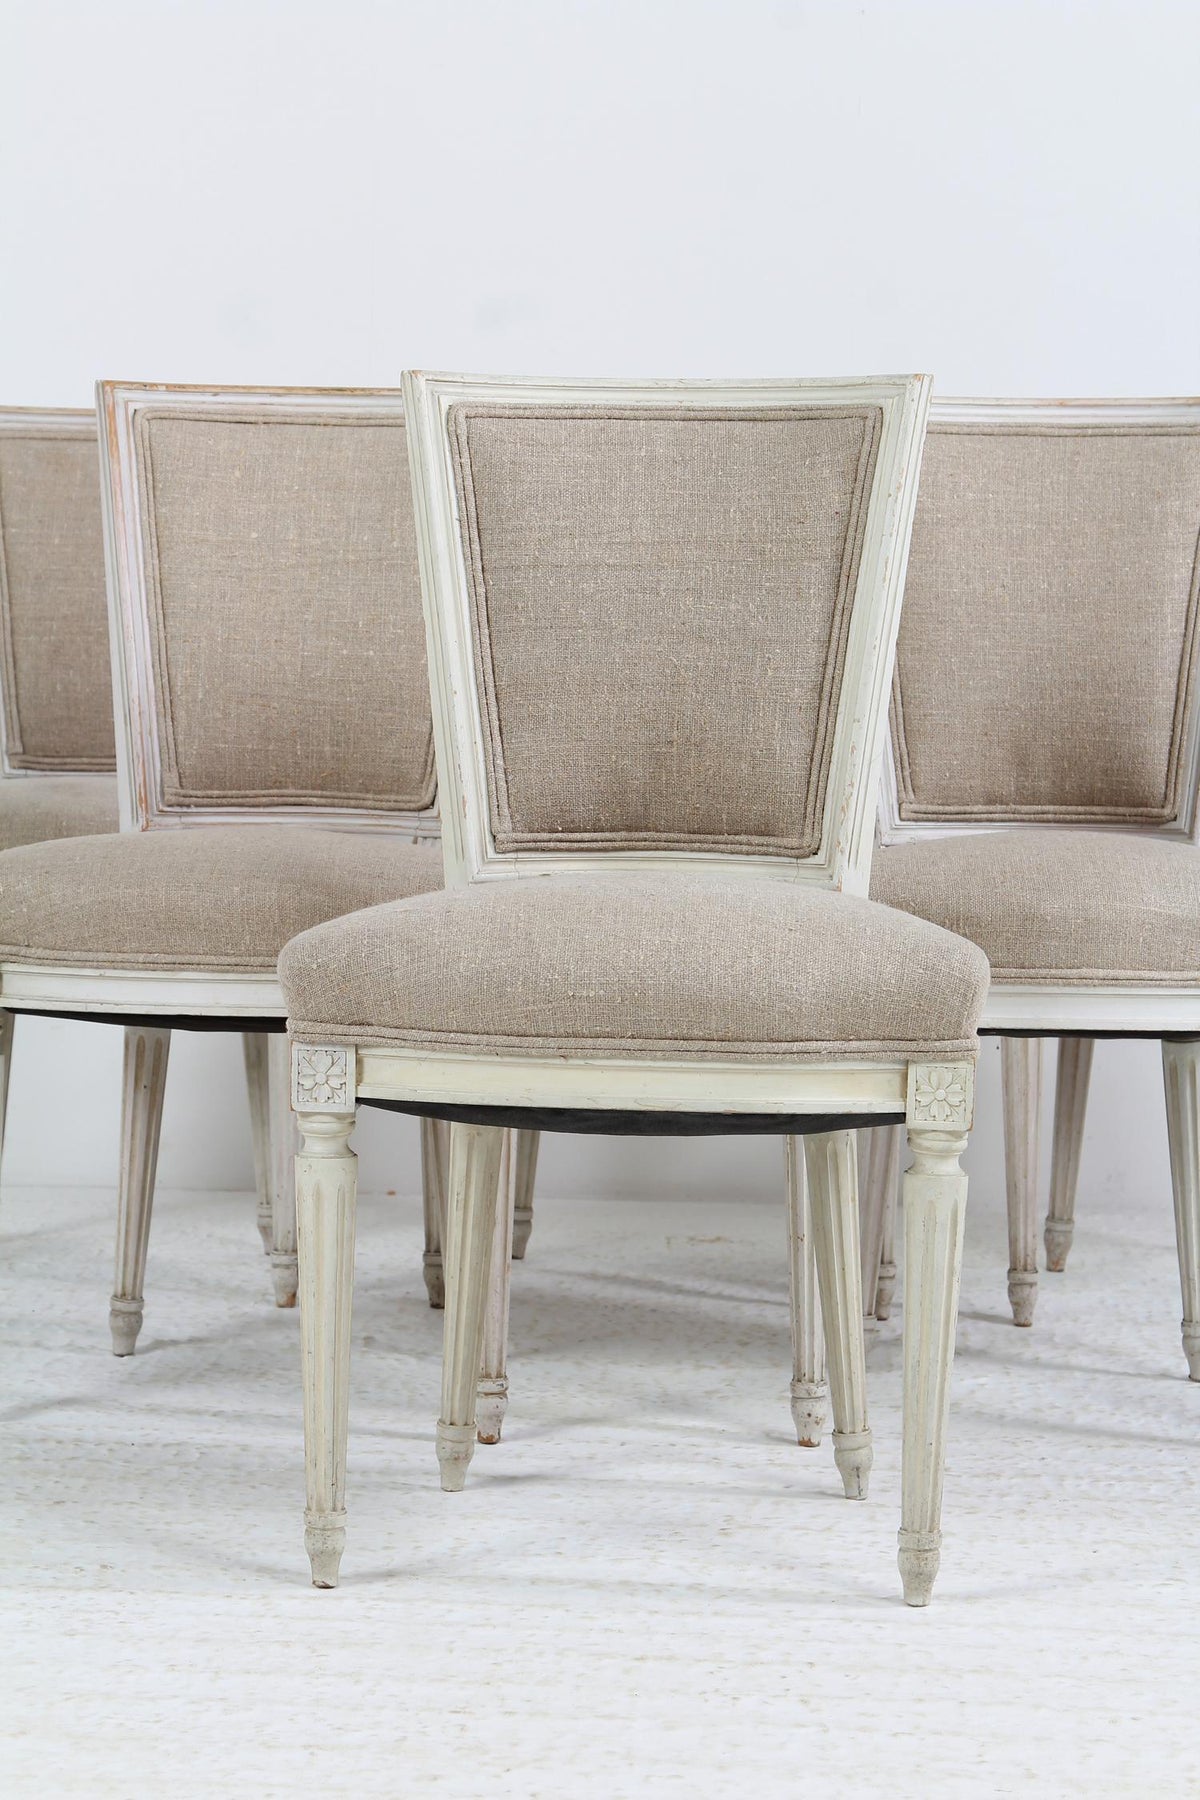 Handsome Set of Six  French Louis XVI  Style Dining Chairs